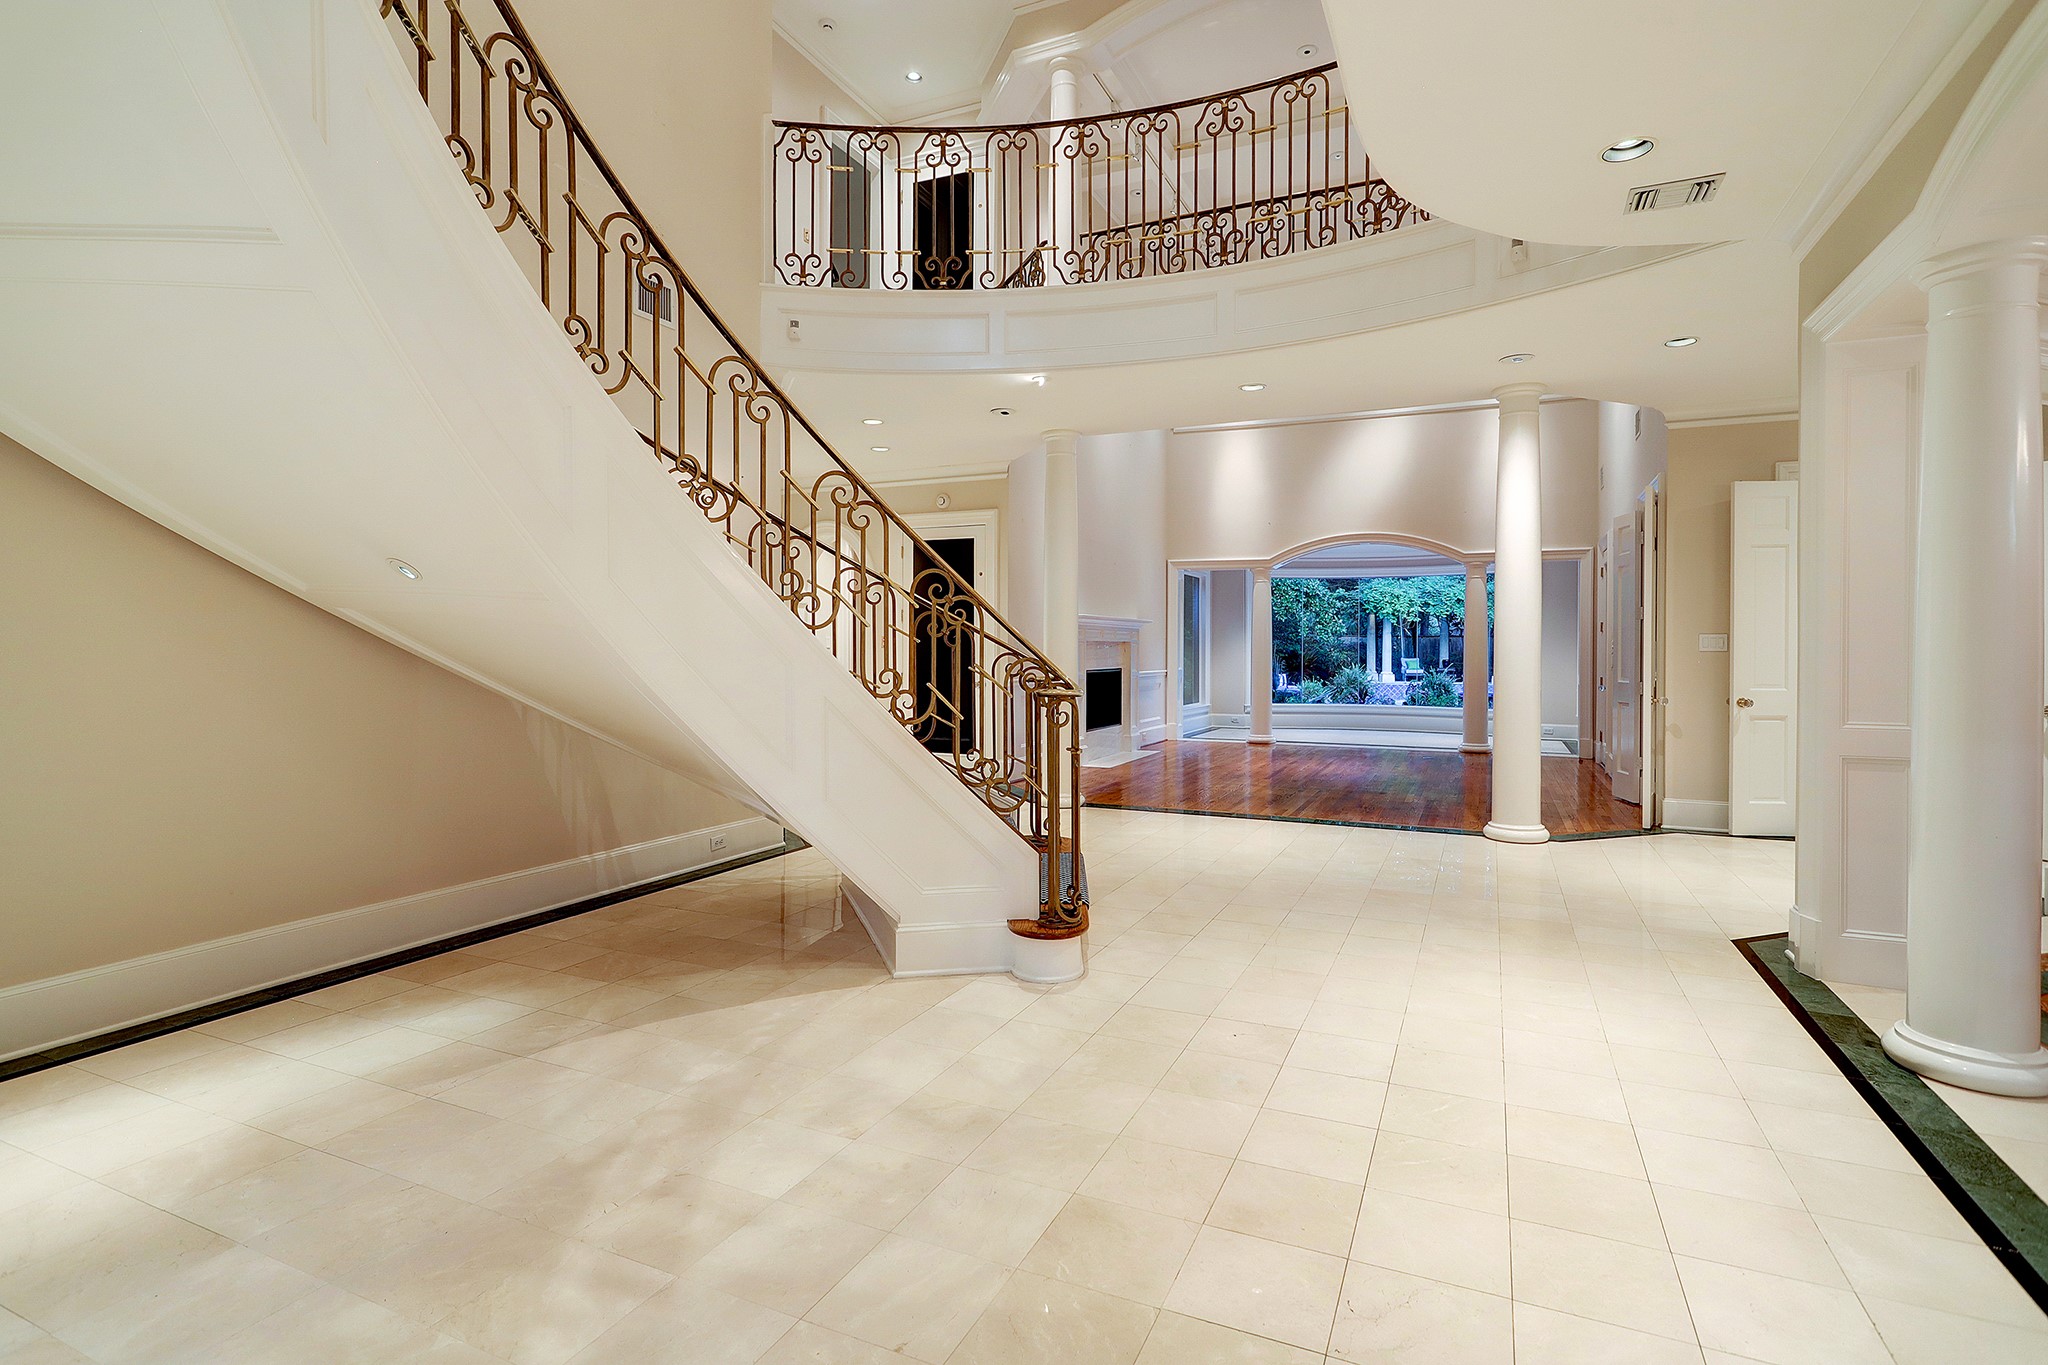 Foyer opens to the two-story living room with a view of the lushly landscaped back yard and pool.